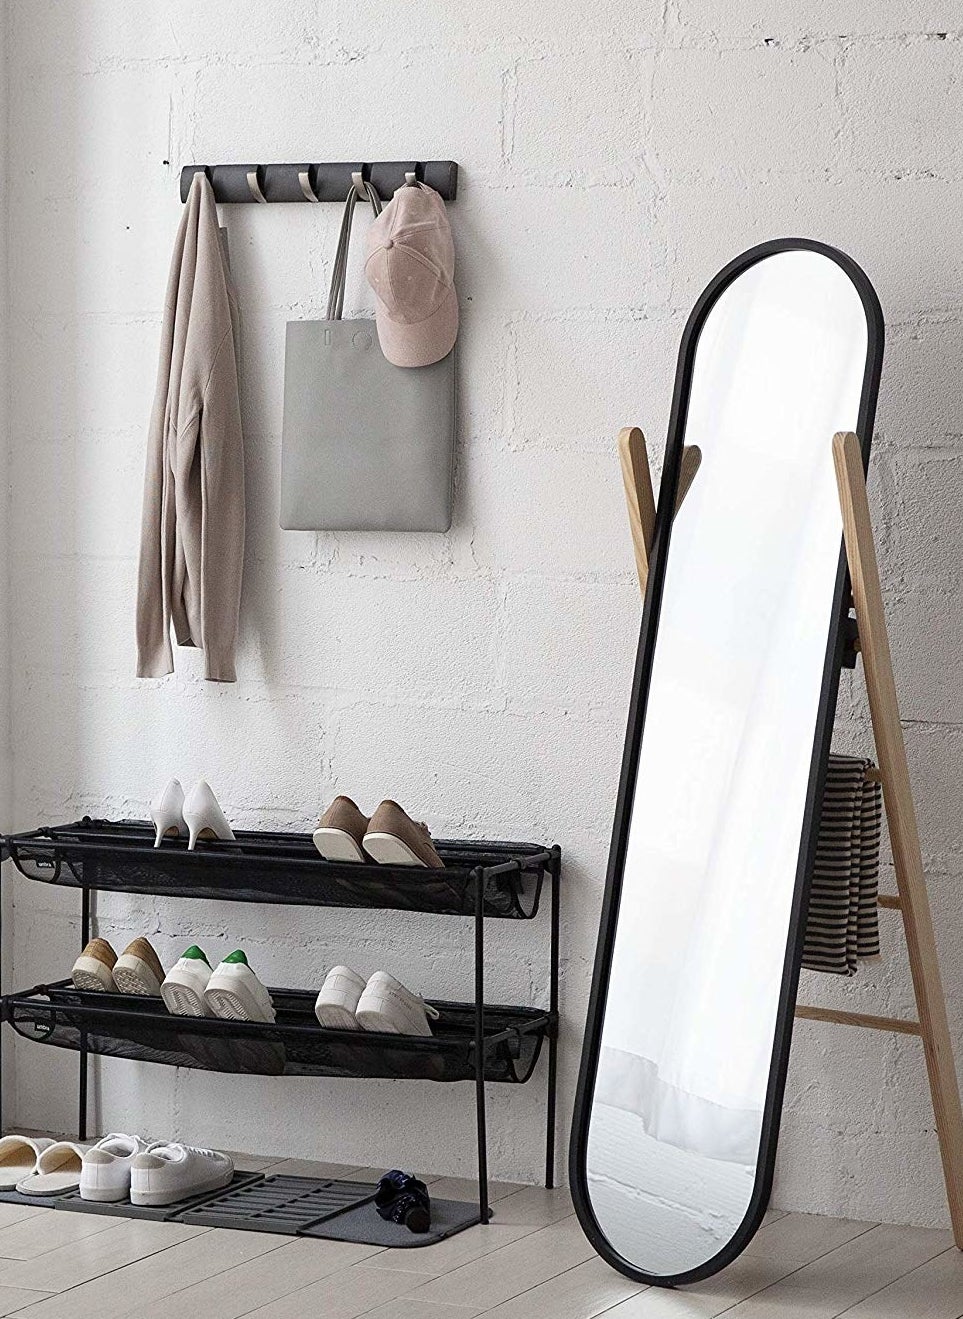 The ladder shelf with a blanket hanging from its back standing next to a shoe shelf and a wall-mounted rack